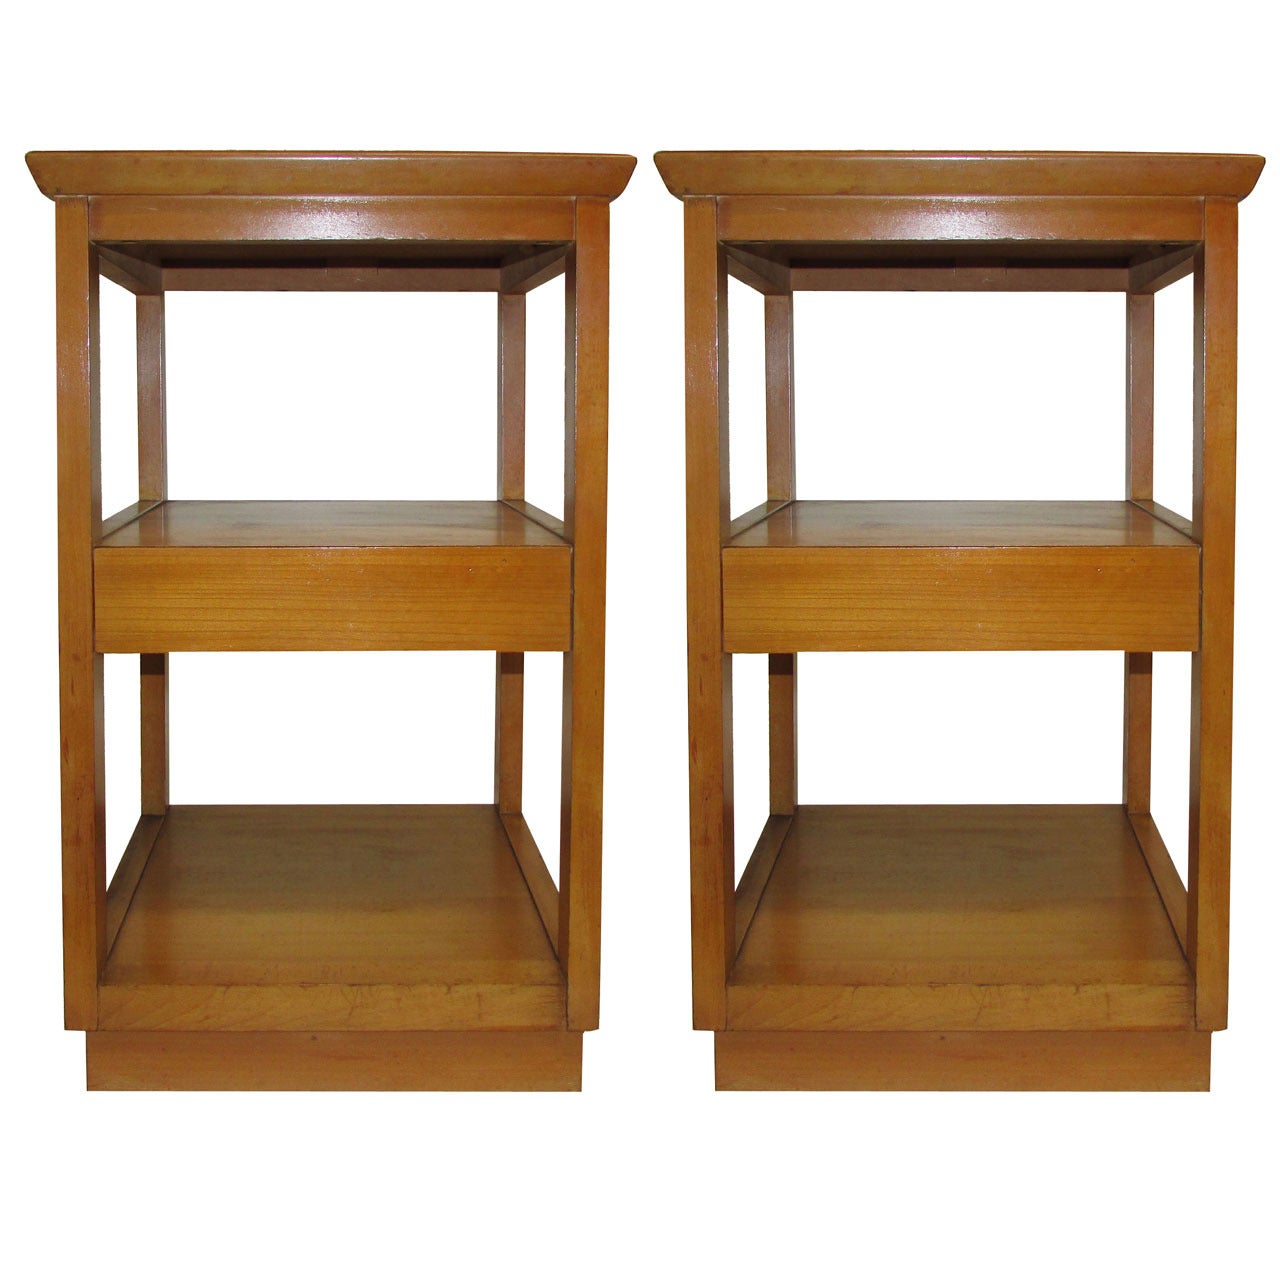 Walnut Side Tables by Edward Wormley for Drexel, Pair